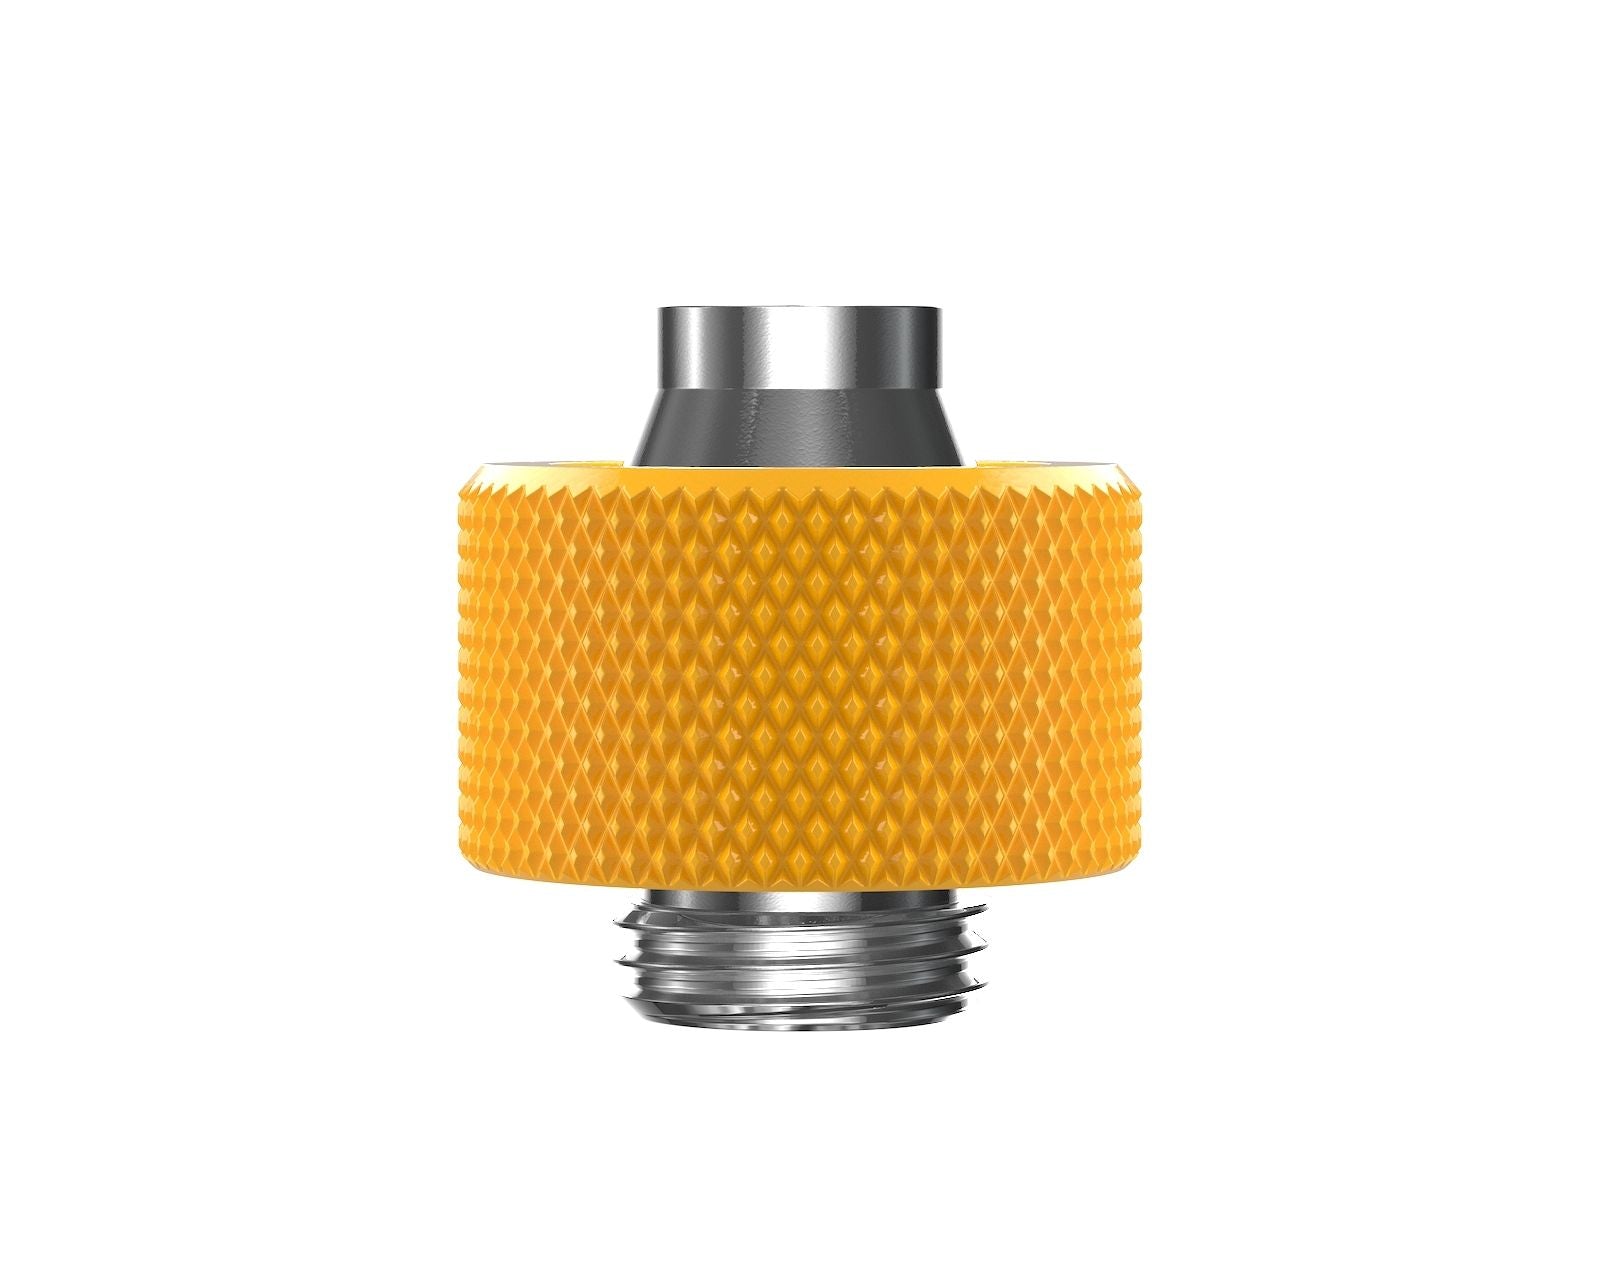 PrimoChill SecureFit SX - Premium Compression Fitting For 7/16in ID x 5/8in OD Flexible Tubing (F-SFSX758) - Available in 20+ Colors, Custom Watercooling Loop Ready - Yellow